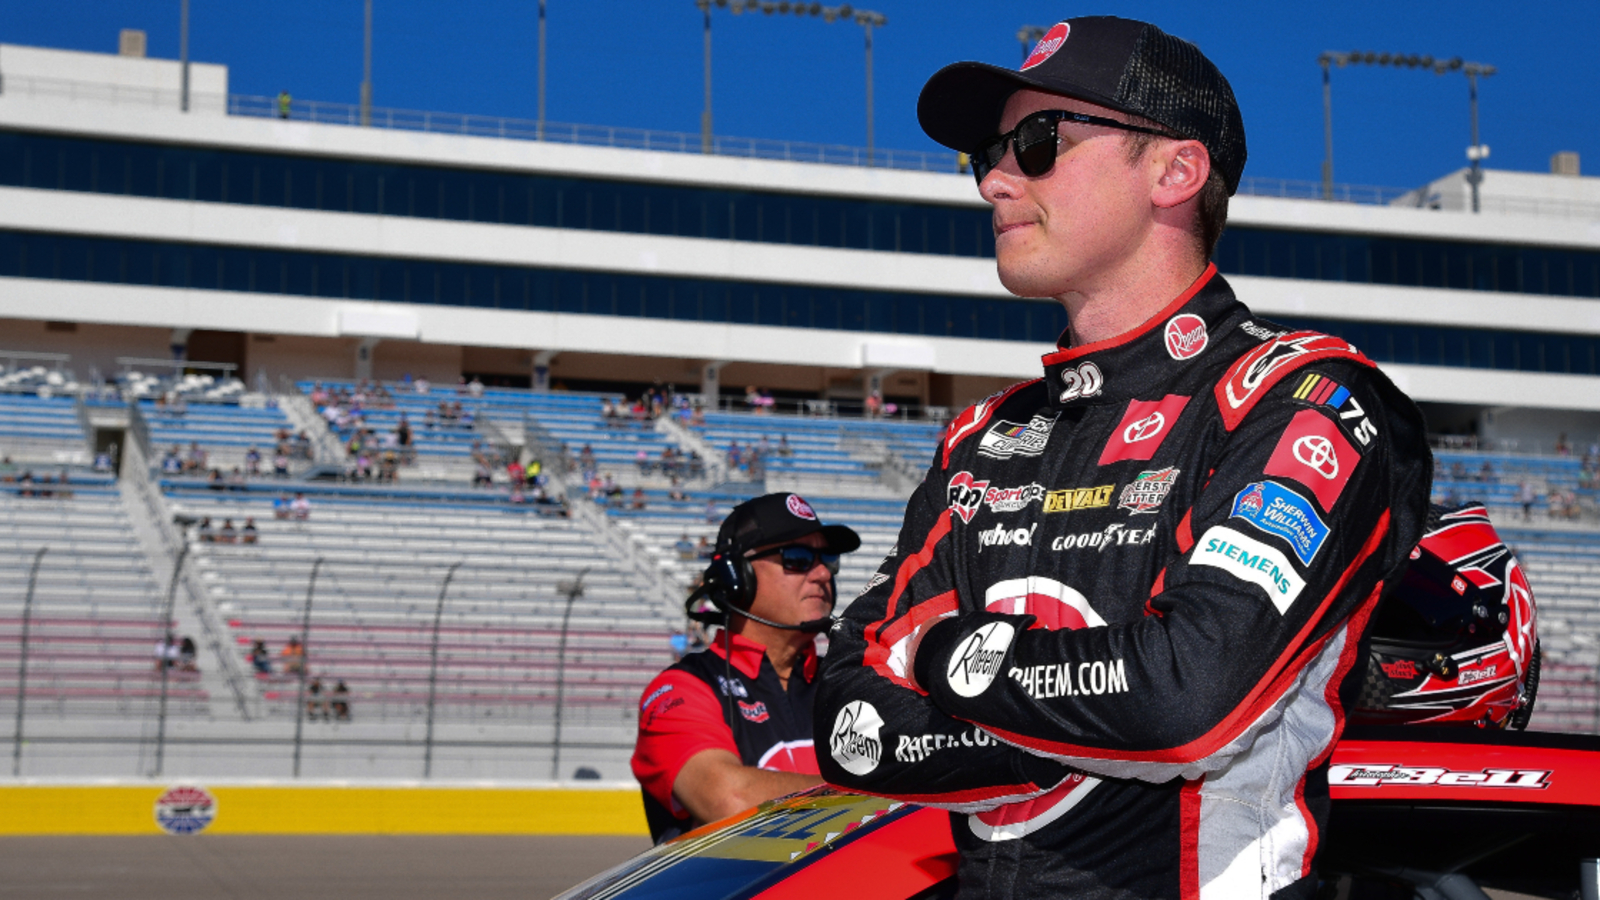 Christopher Bell has ‘unfinished business’ after disappointing championship finish